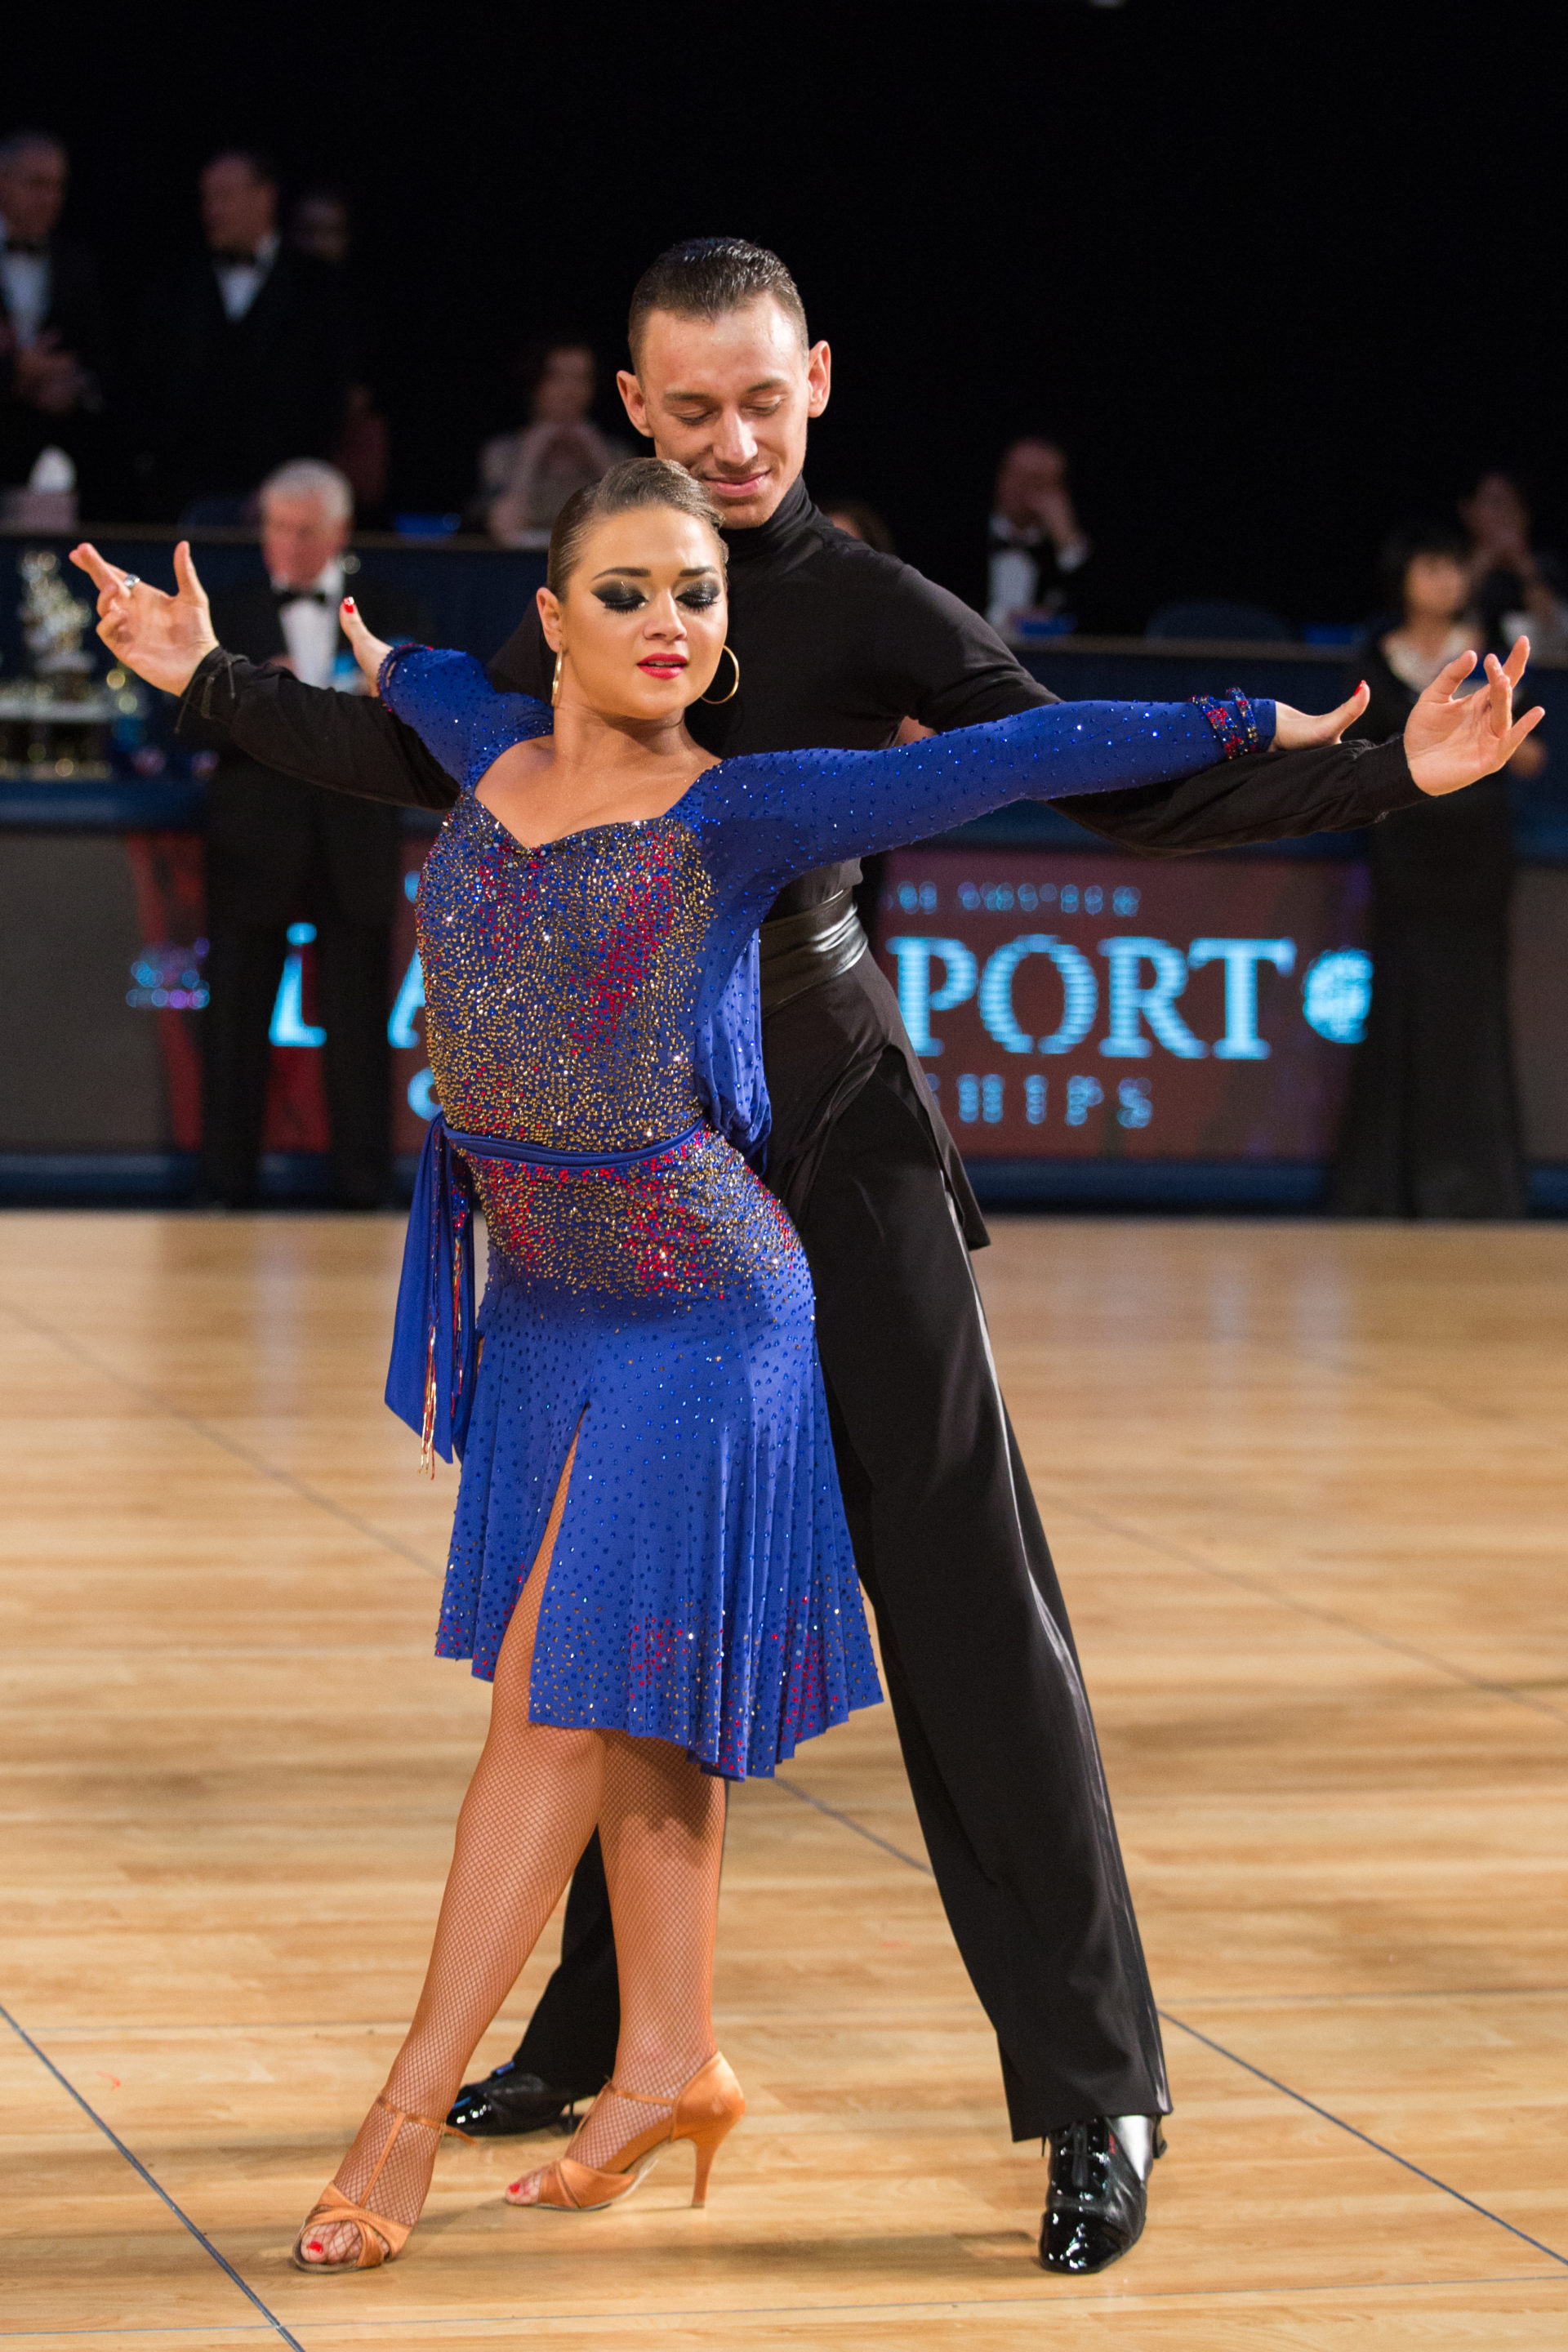 BYU hosts 2019 DanceSport Championships - The Daily Universe